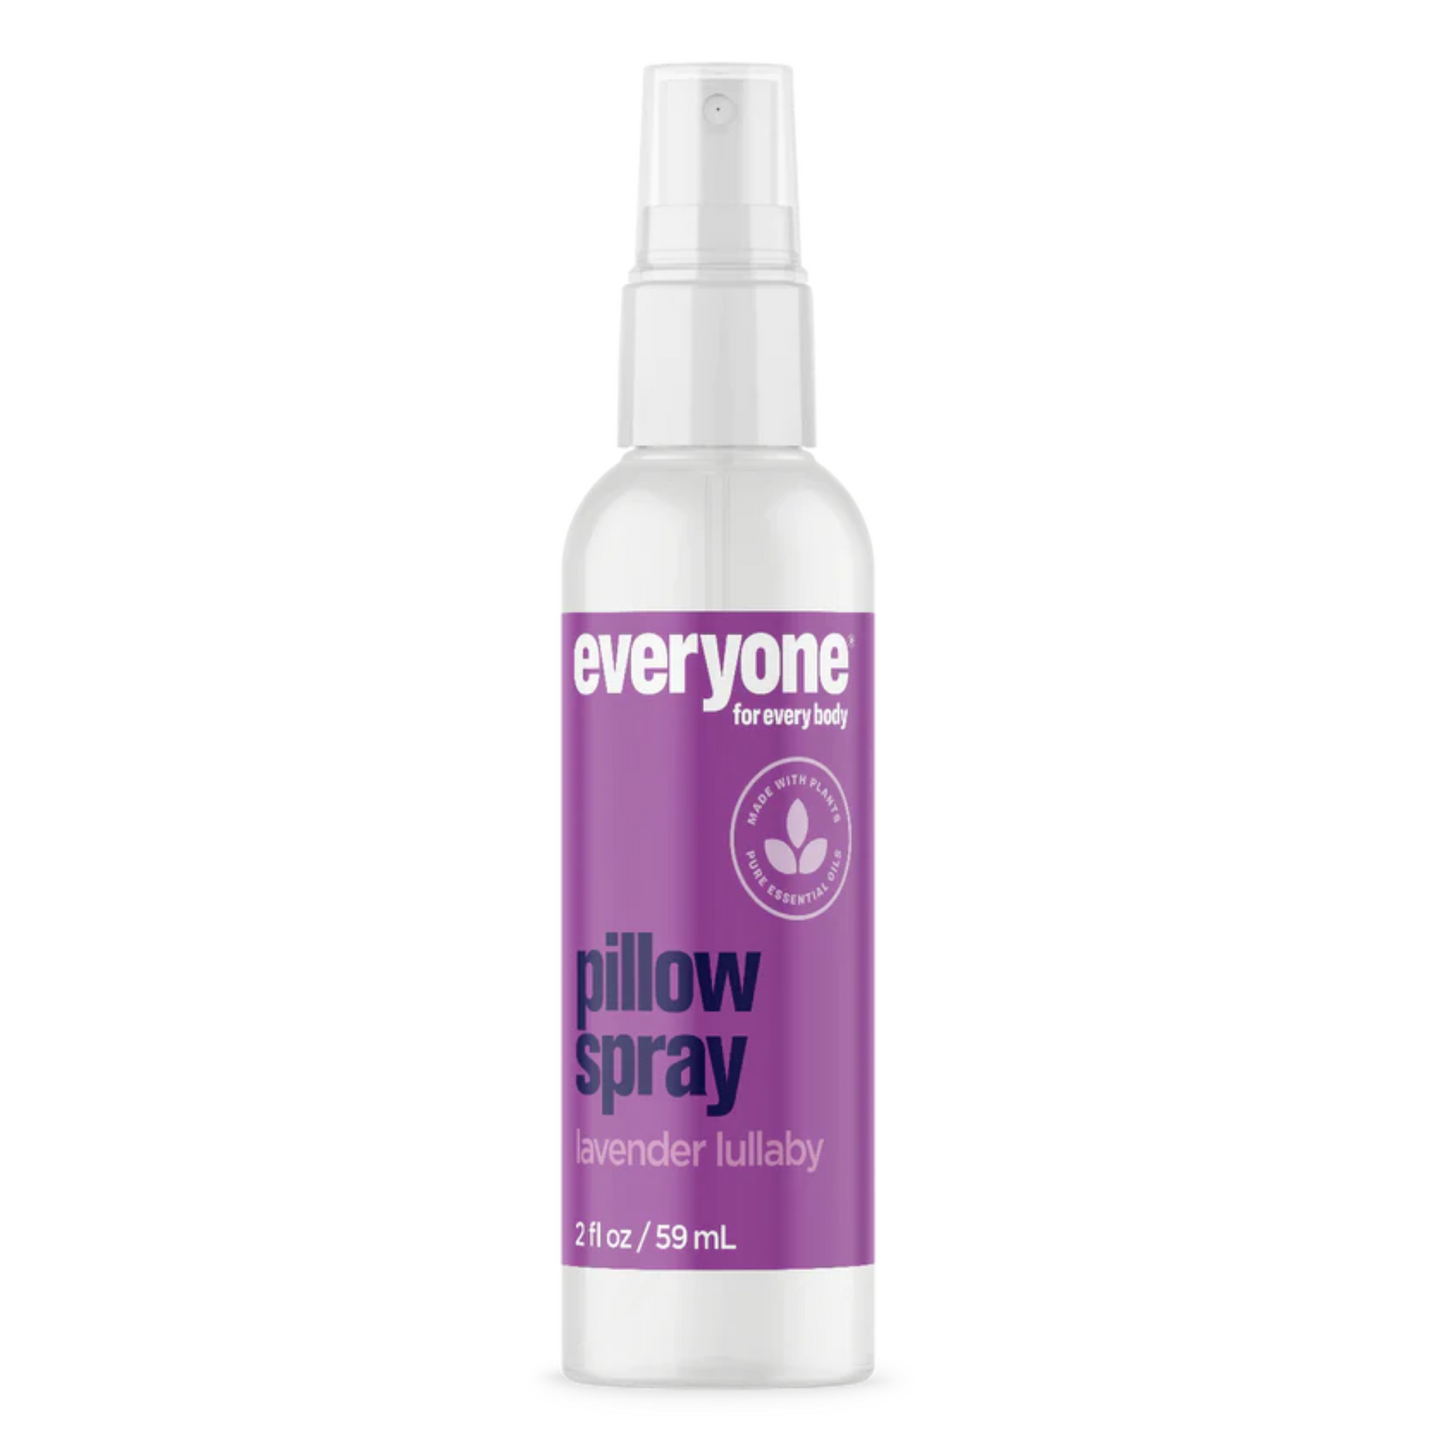 Primary Image of EO Lavender Lullaby Pillow Spray (2 fl oz) 